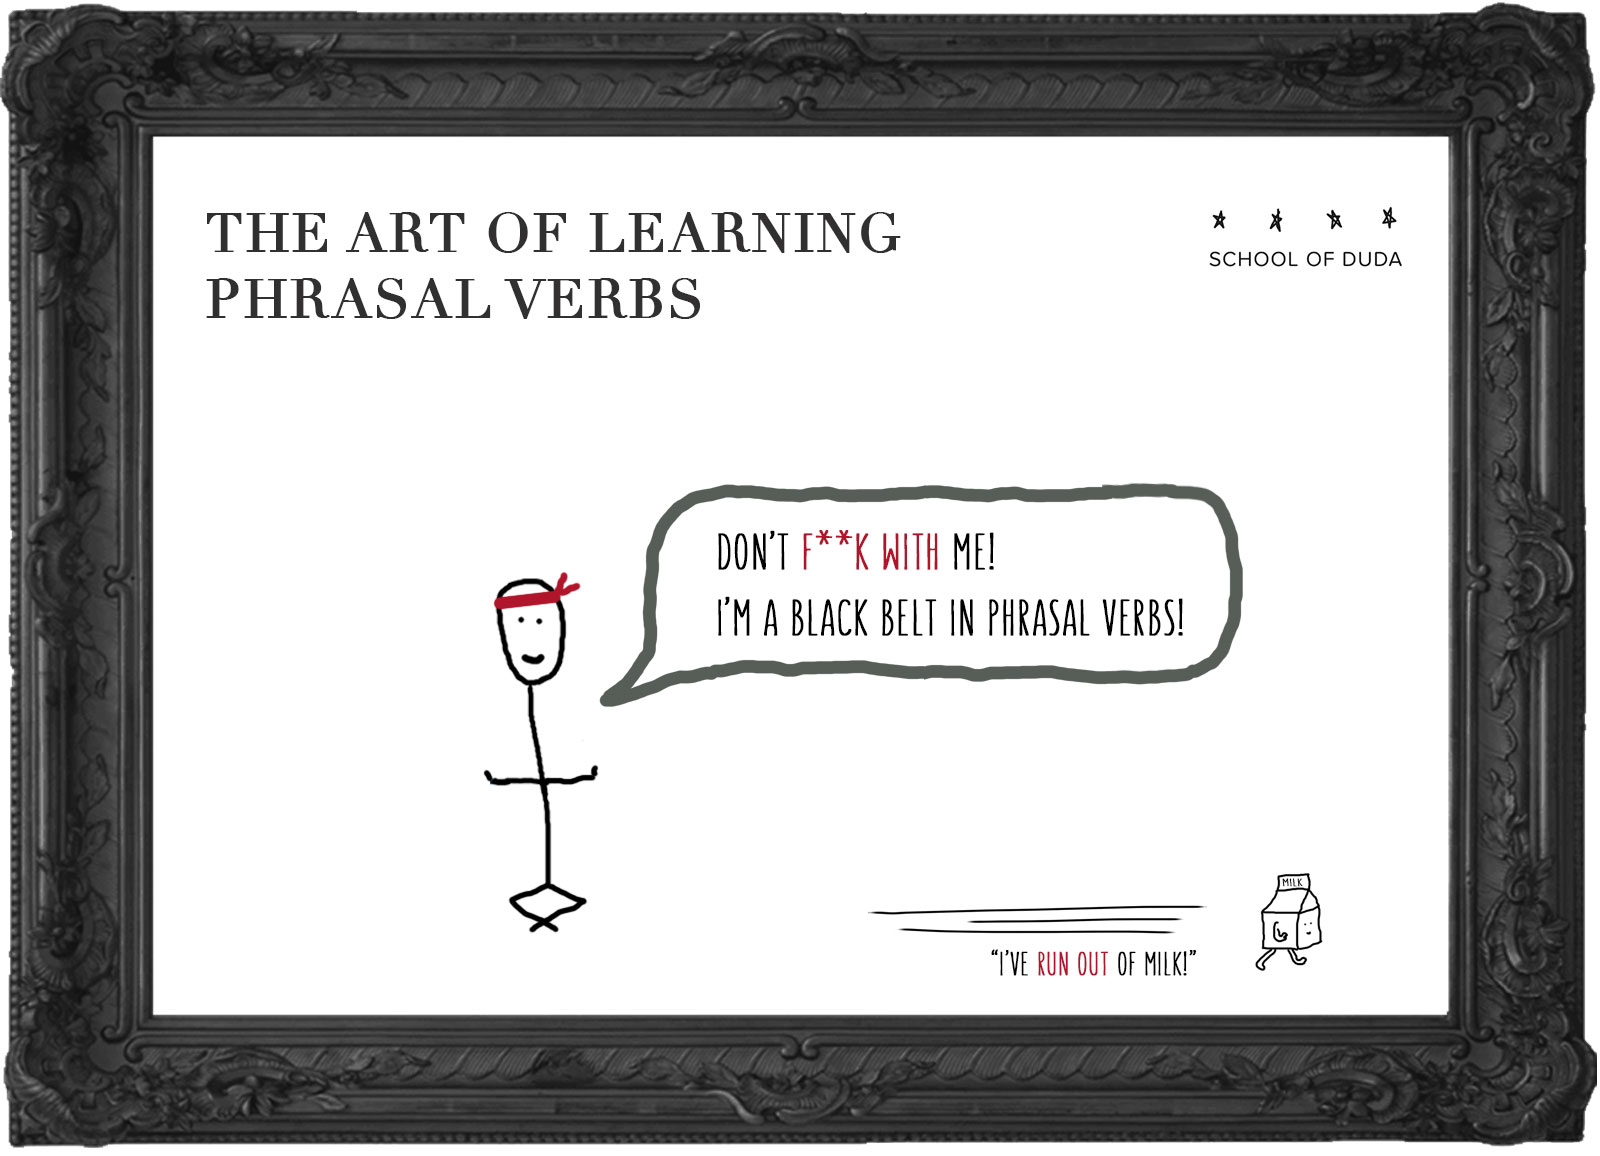 THE ART OF LEARNING PHRASAL VERBS - English Course